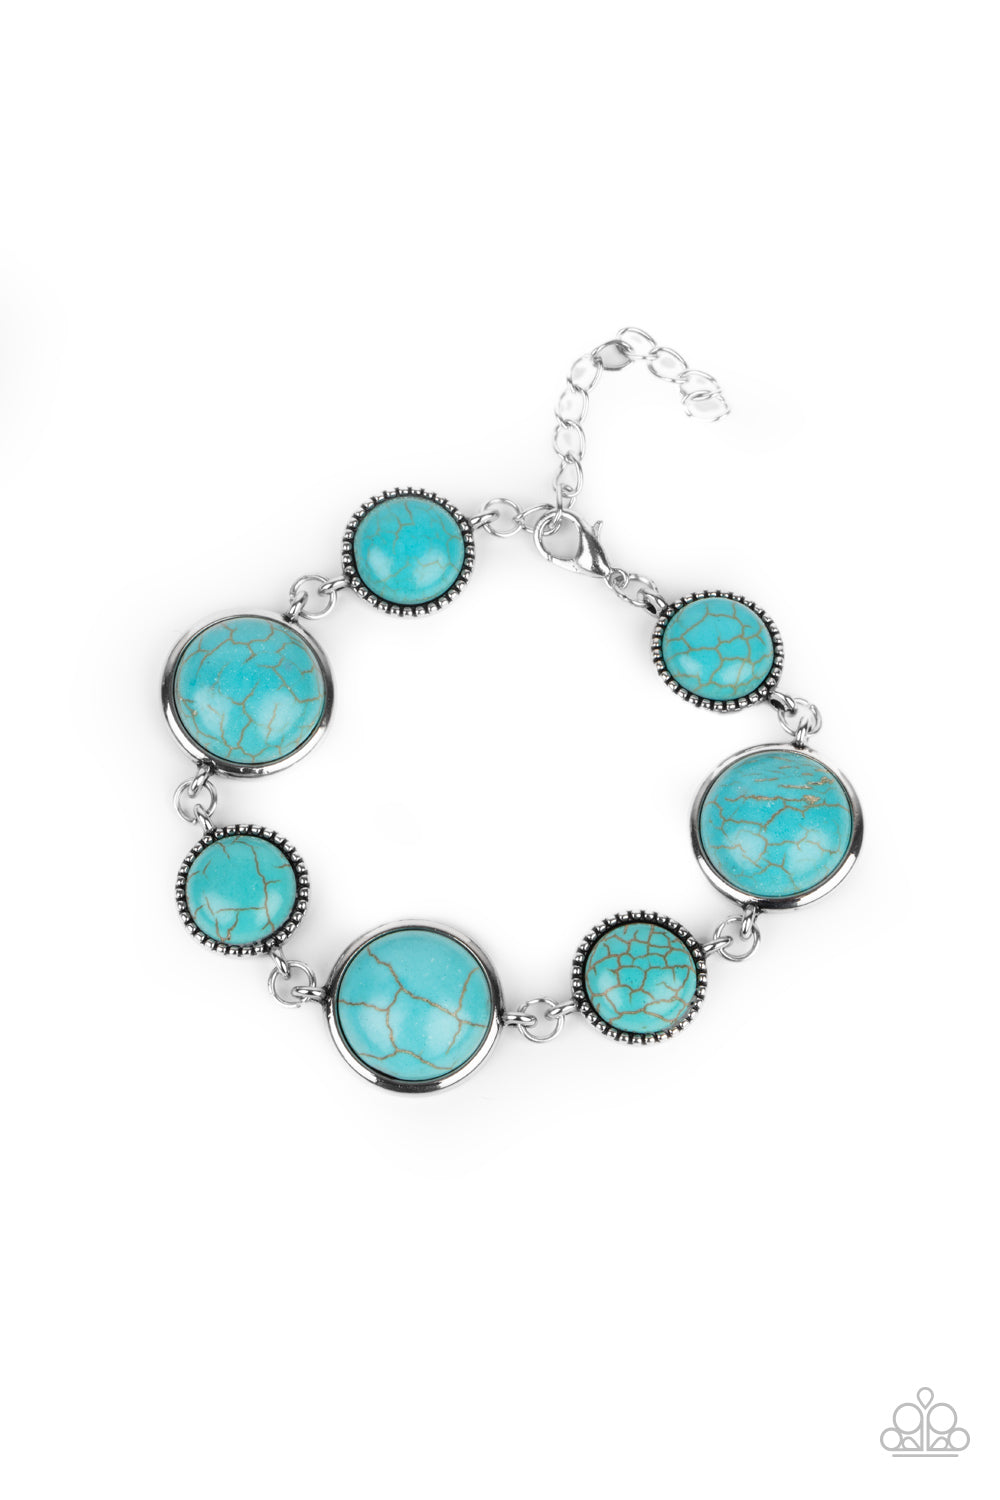 Turn Up The Terra Blue Bracelet - Paparazzi Accessories  Featuring studded and plain silver frames, small and large turquoise stones delicately alternate around the wrist for a rustic flair. Features an adjustable clasp closure.  All Paparazzi Accessories are lead free and nickel free!  Sold as one individual bracelet.  Get The Complete Look! Necklace: "Terrestrial Trailblazer - Blue" (Sold Separately)